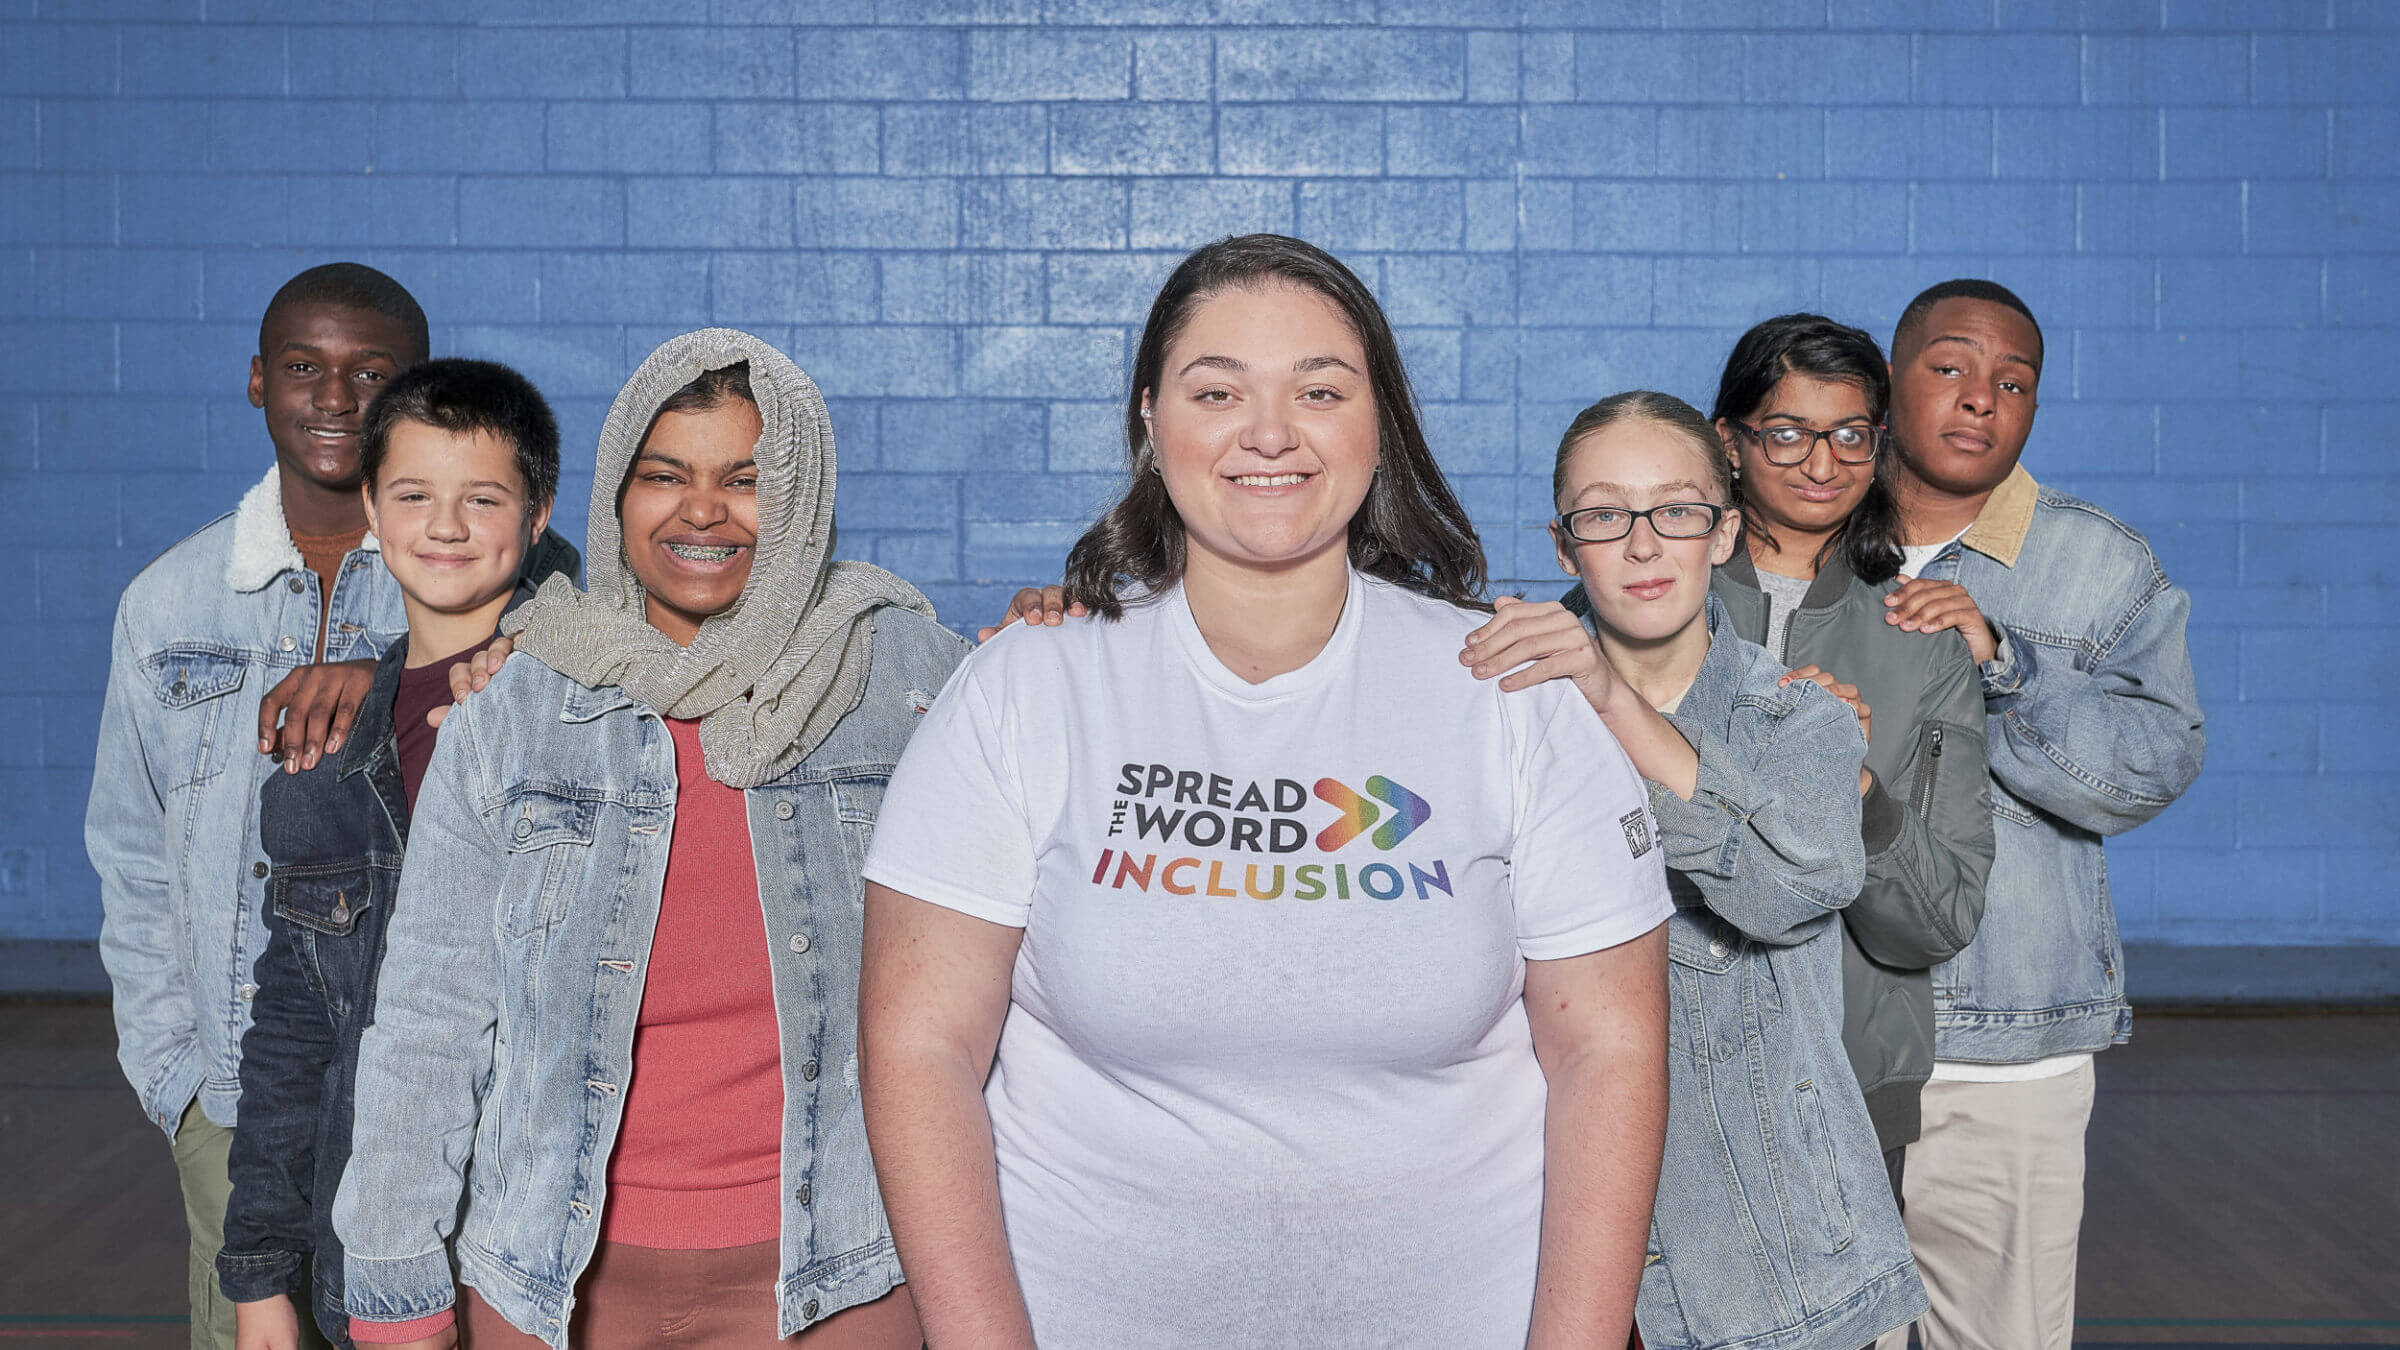 Group of students posing around one student wearing a Spread the Word shirt.